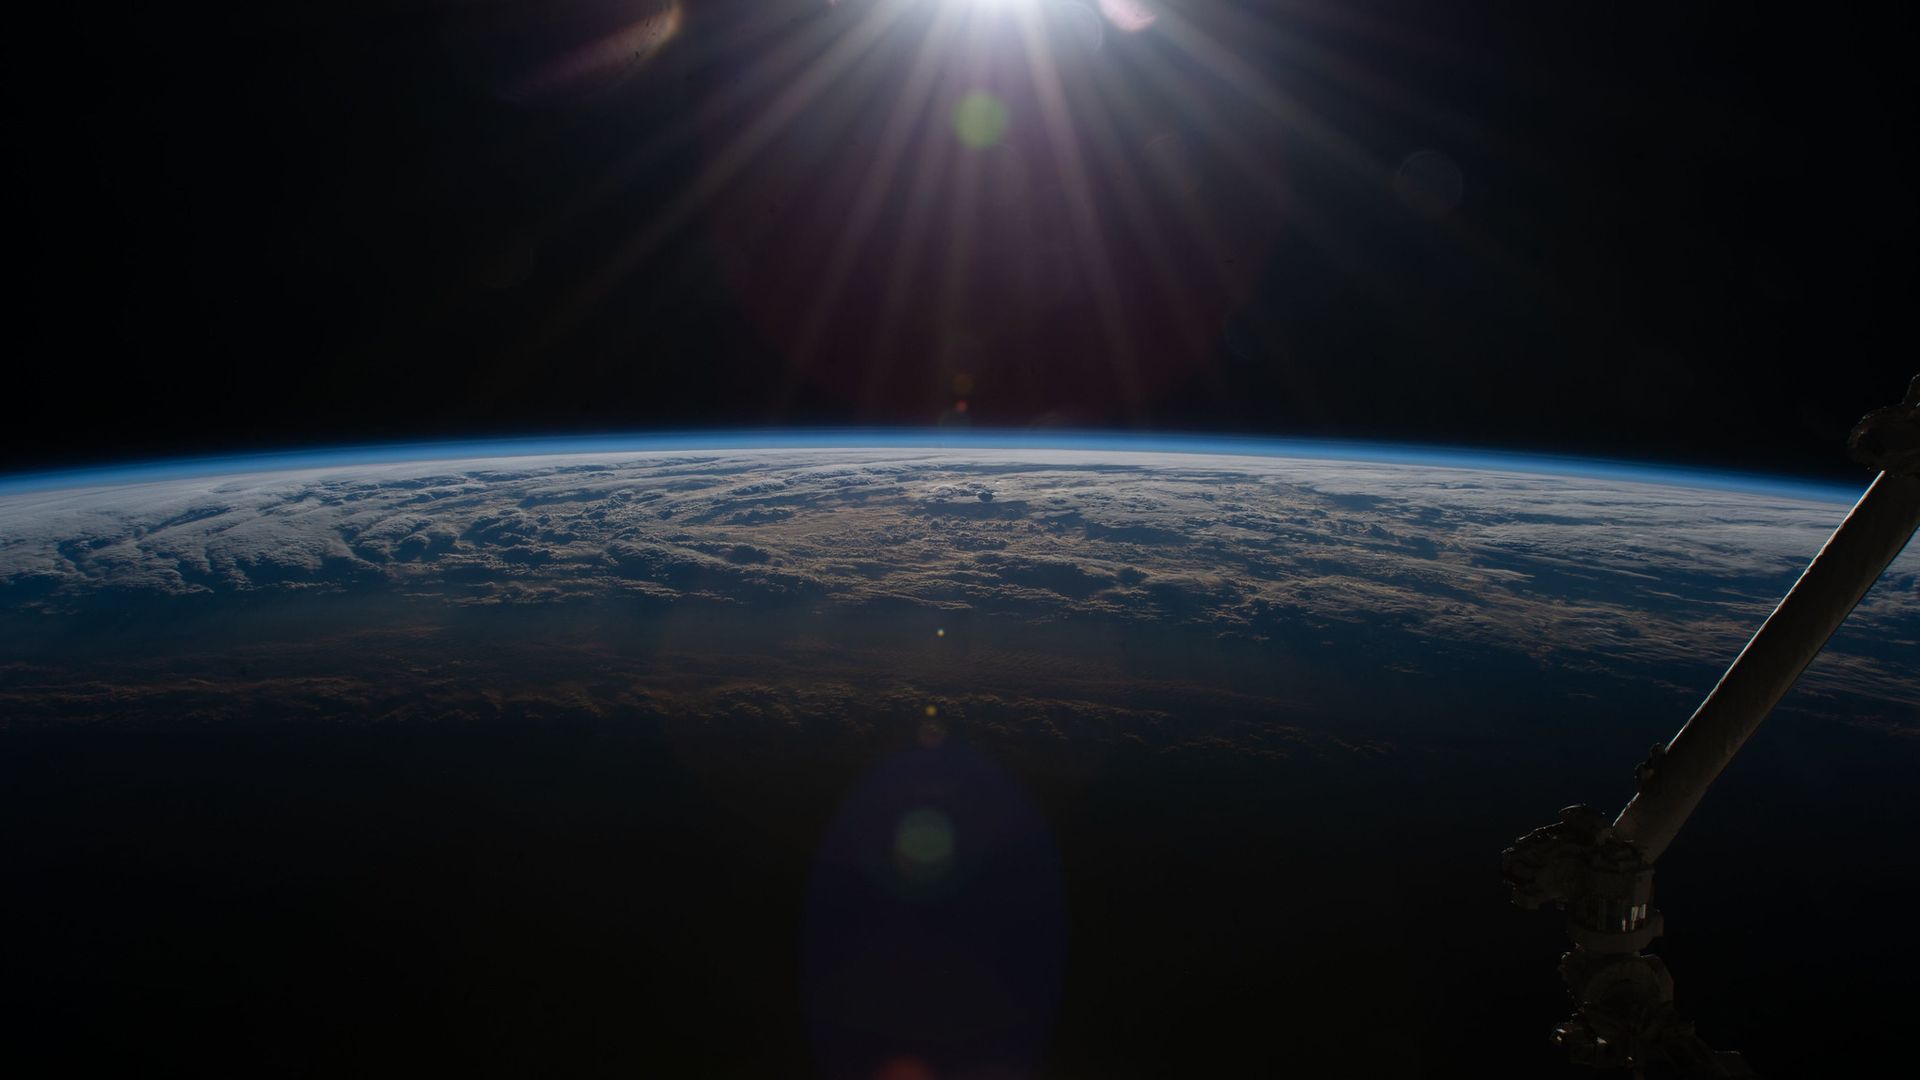 An orbital sunrise as seen from the International Space Station.